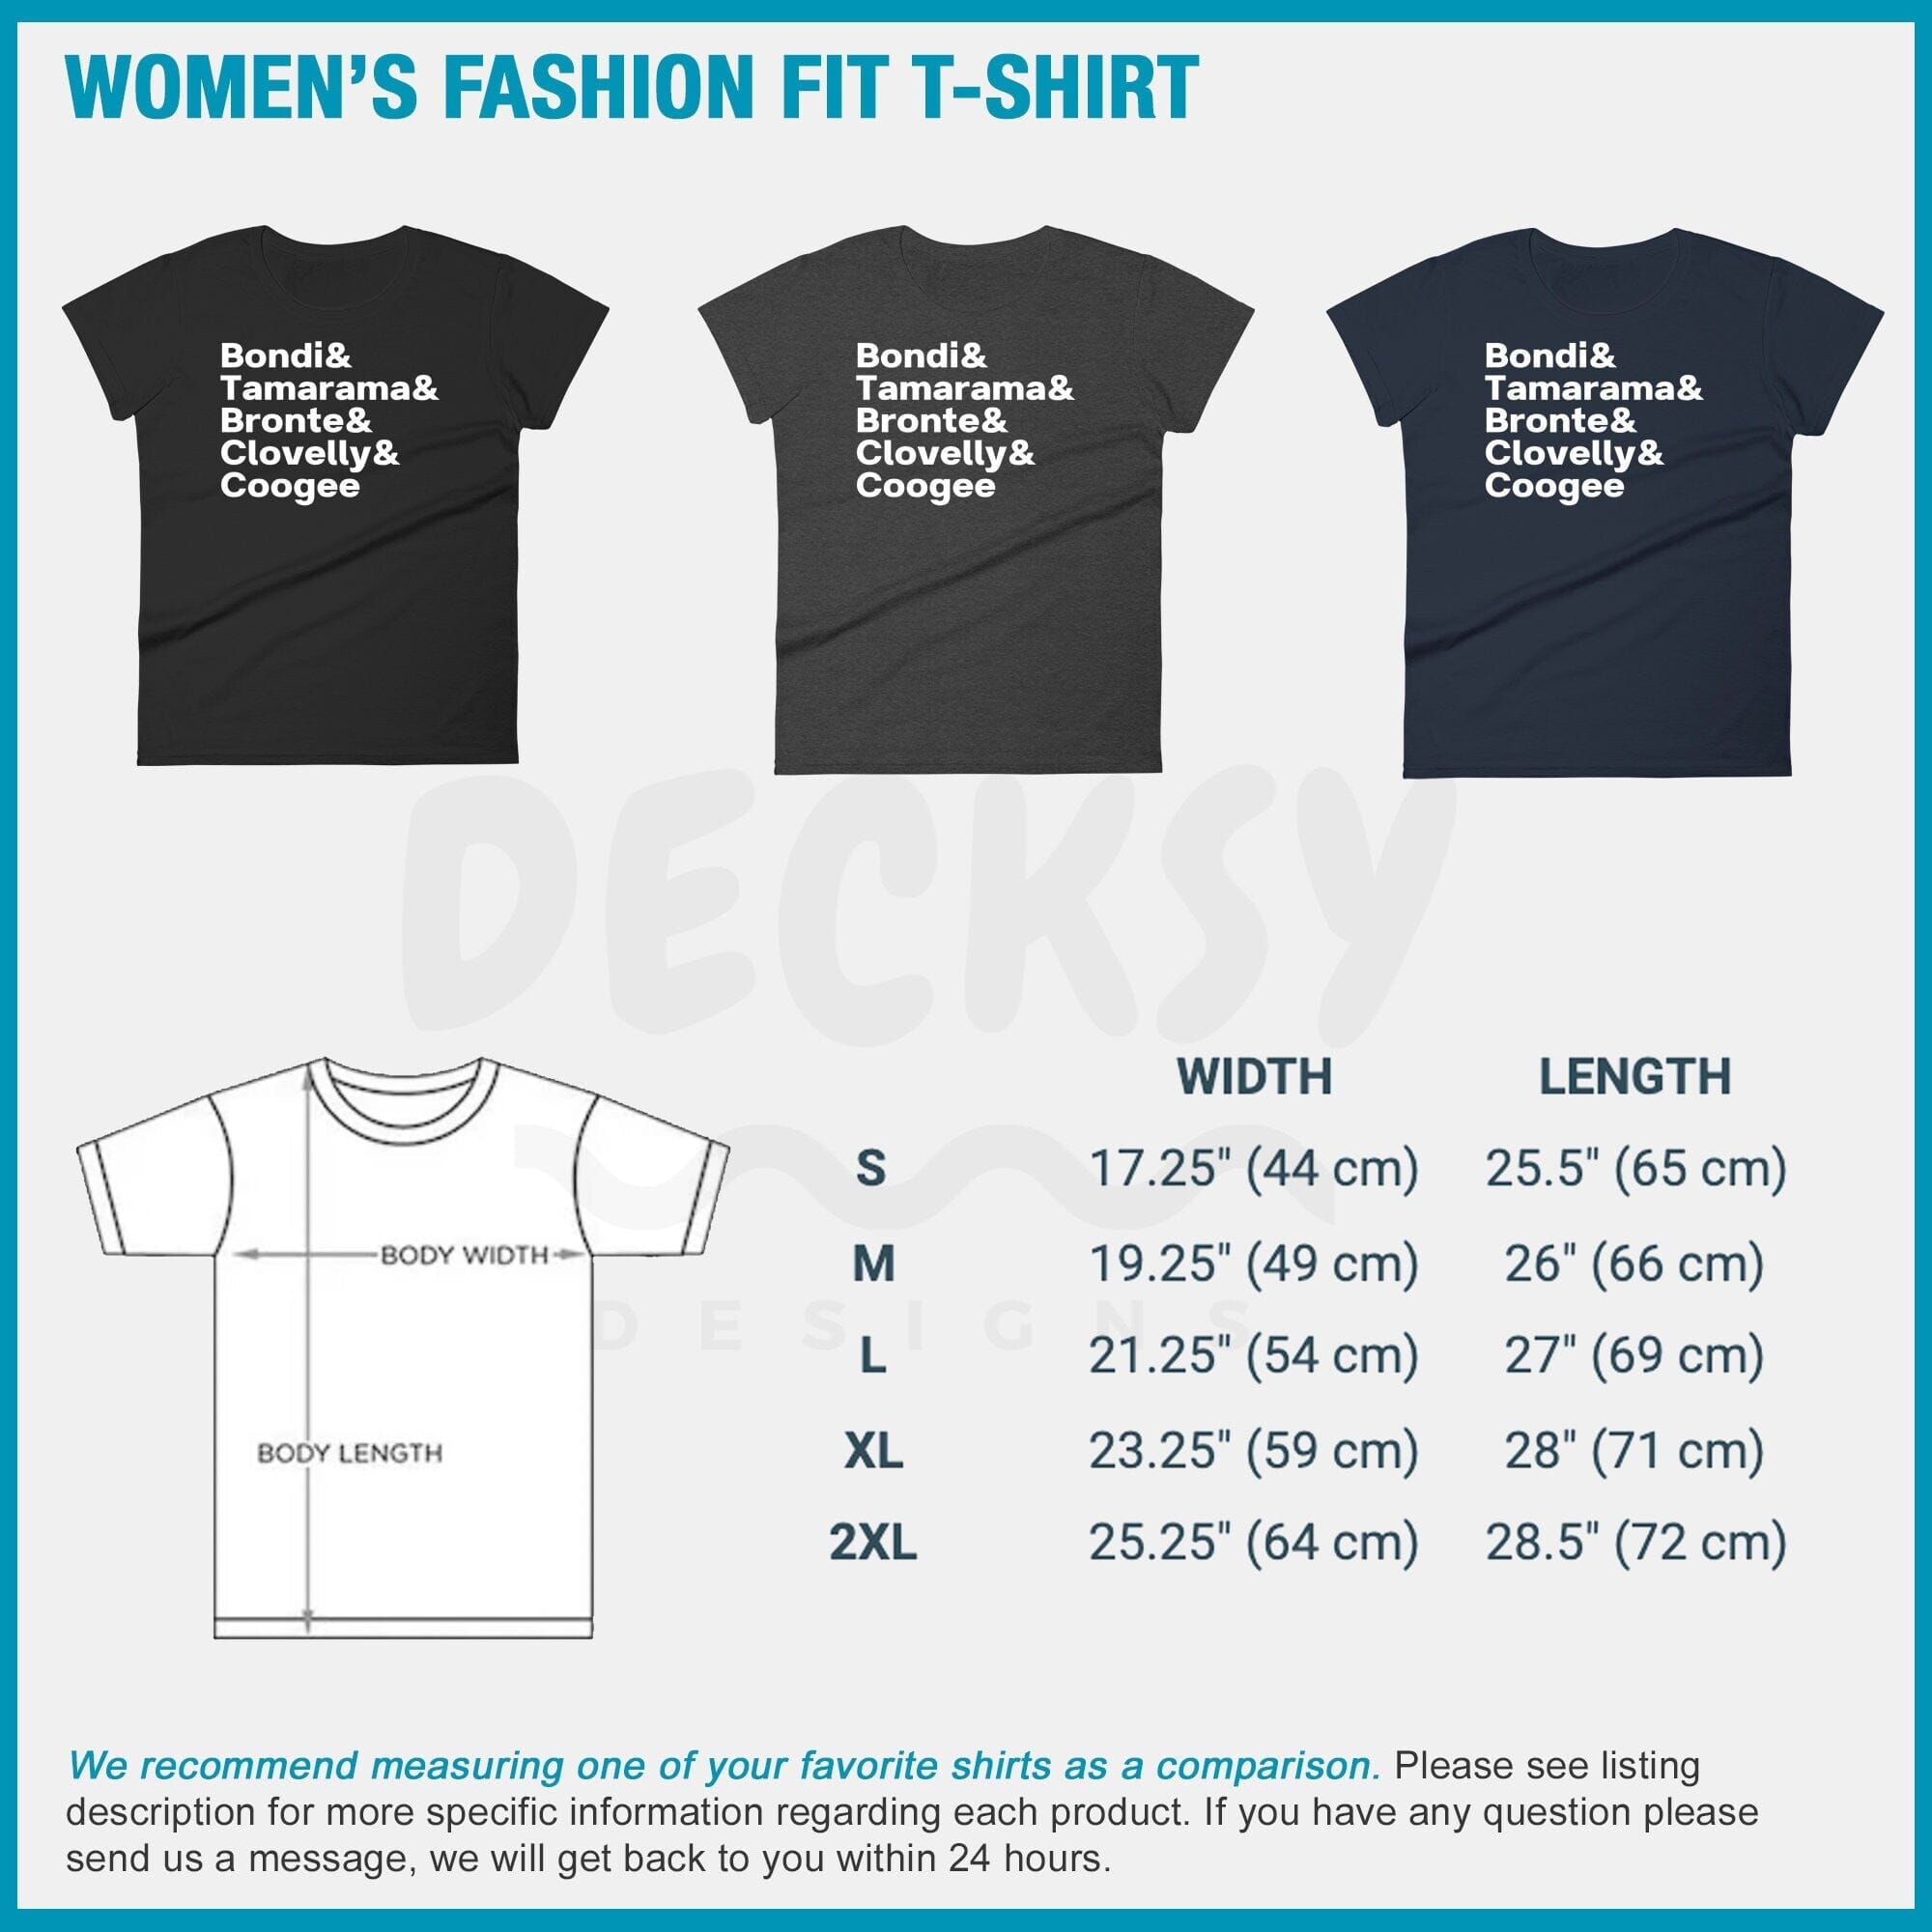 Sydney Beaches Tshirt, Australian Gift-Clothing:Gender-Neutral Adult Clothing:Tops & Tees:T-shirts:Graphic Tees-DecksyDesigns